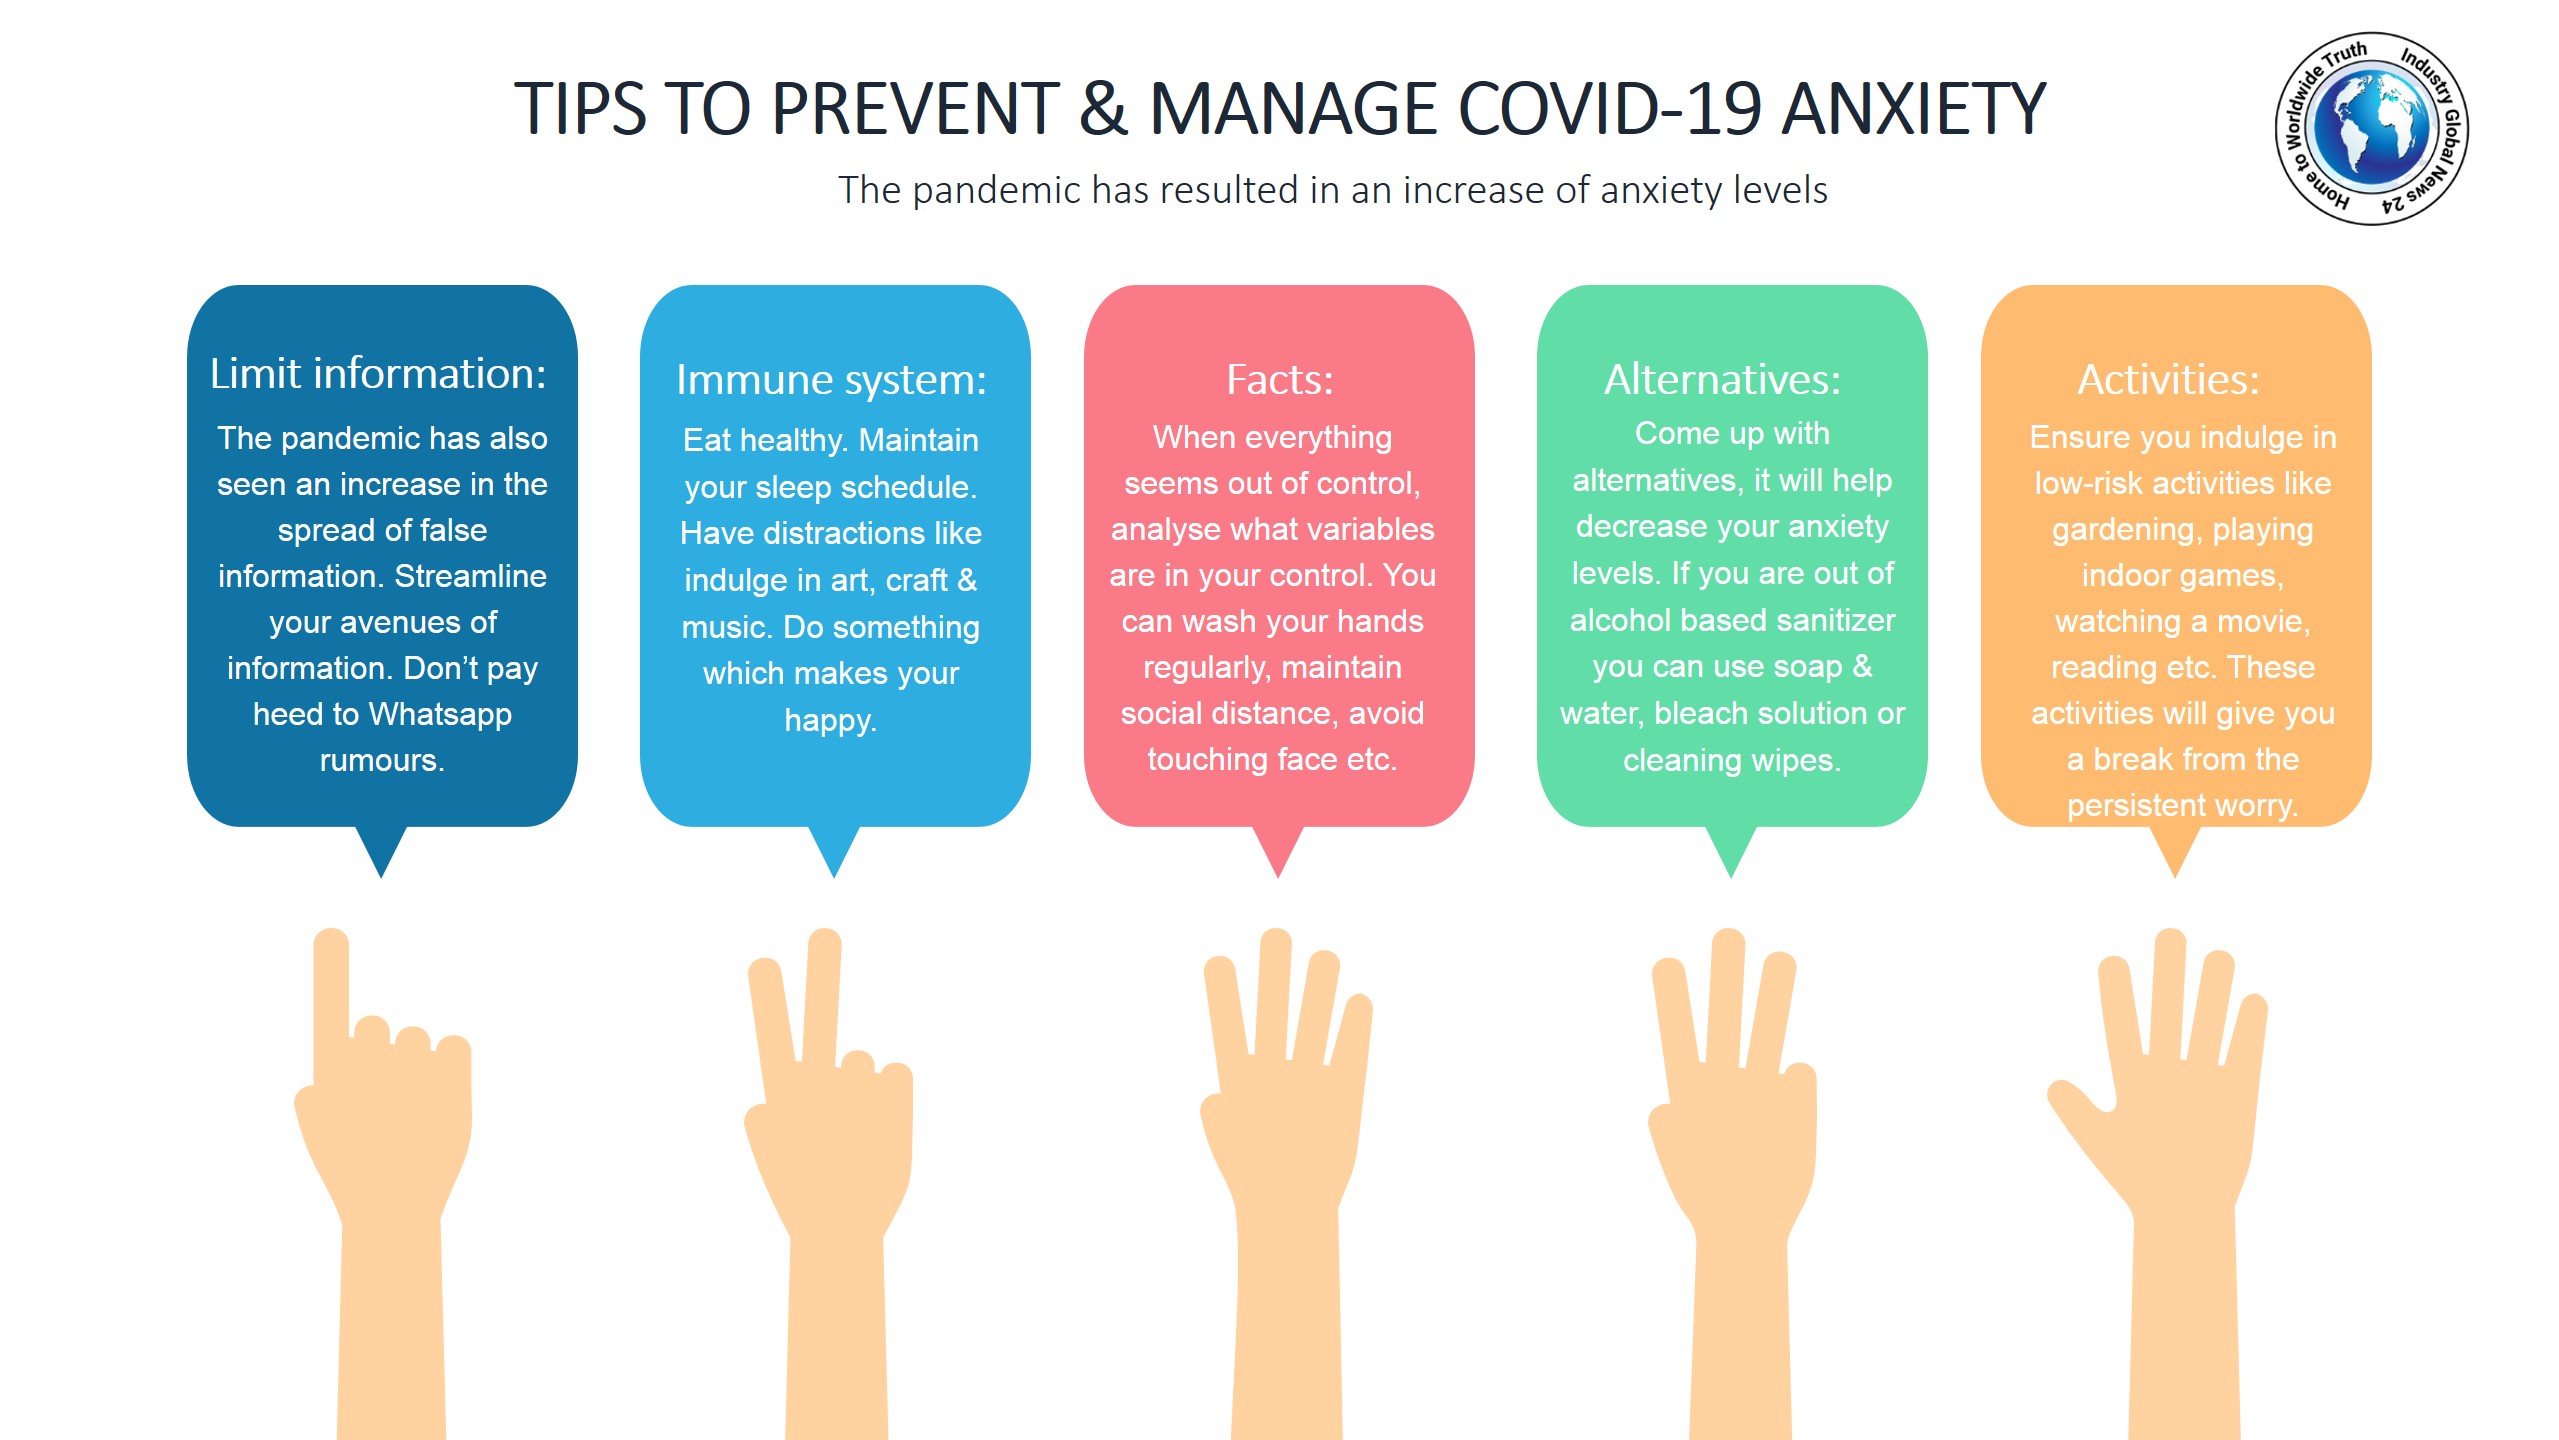 Tips to prevent & manage COVID-19 anxiety